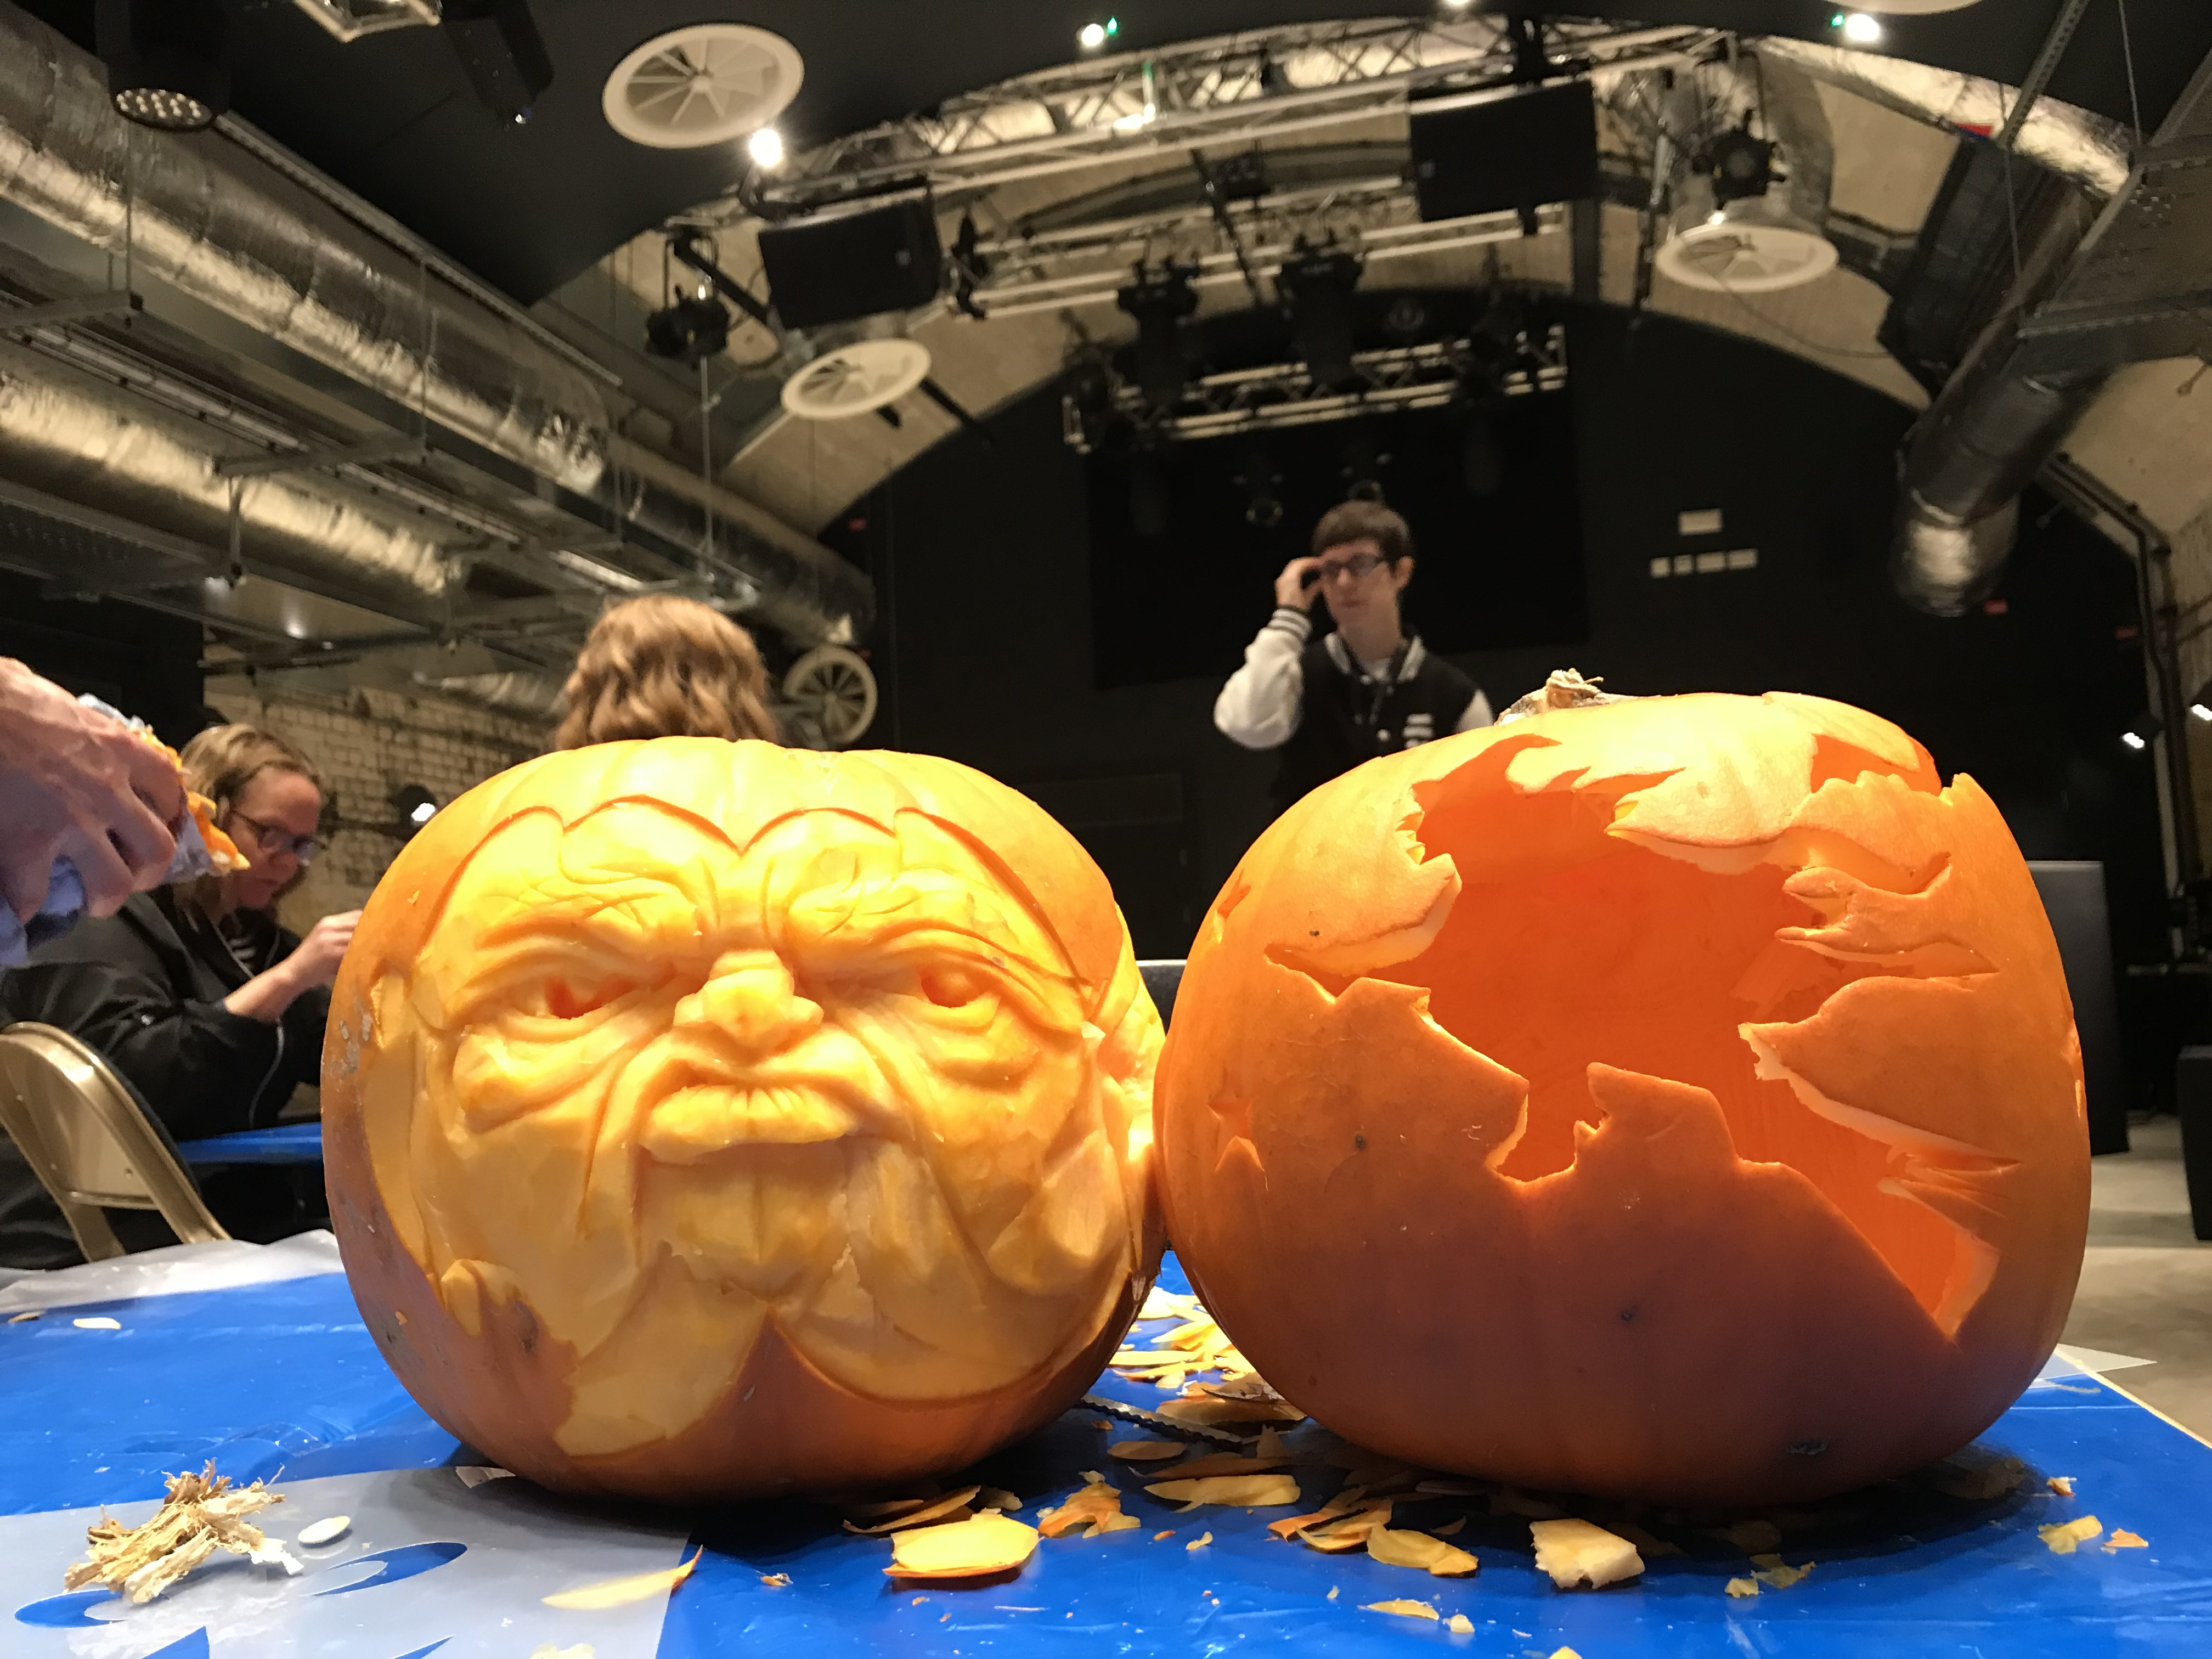 What can be achieved at the pop up pumpkin carving workshops